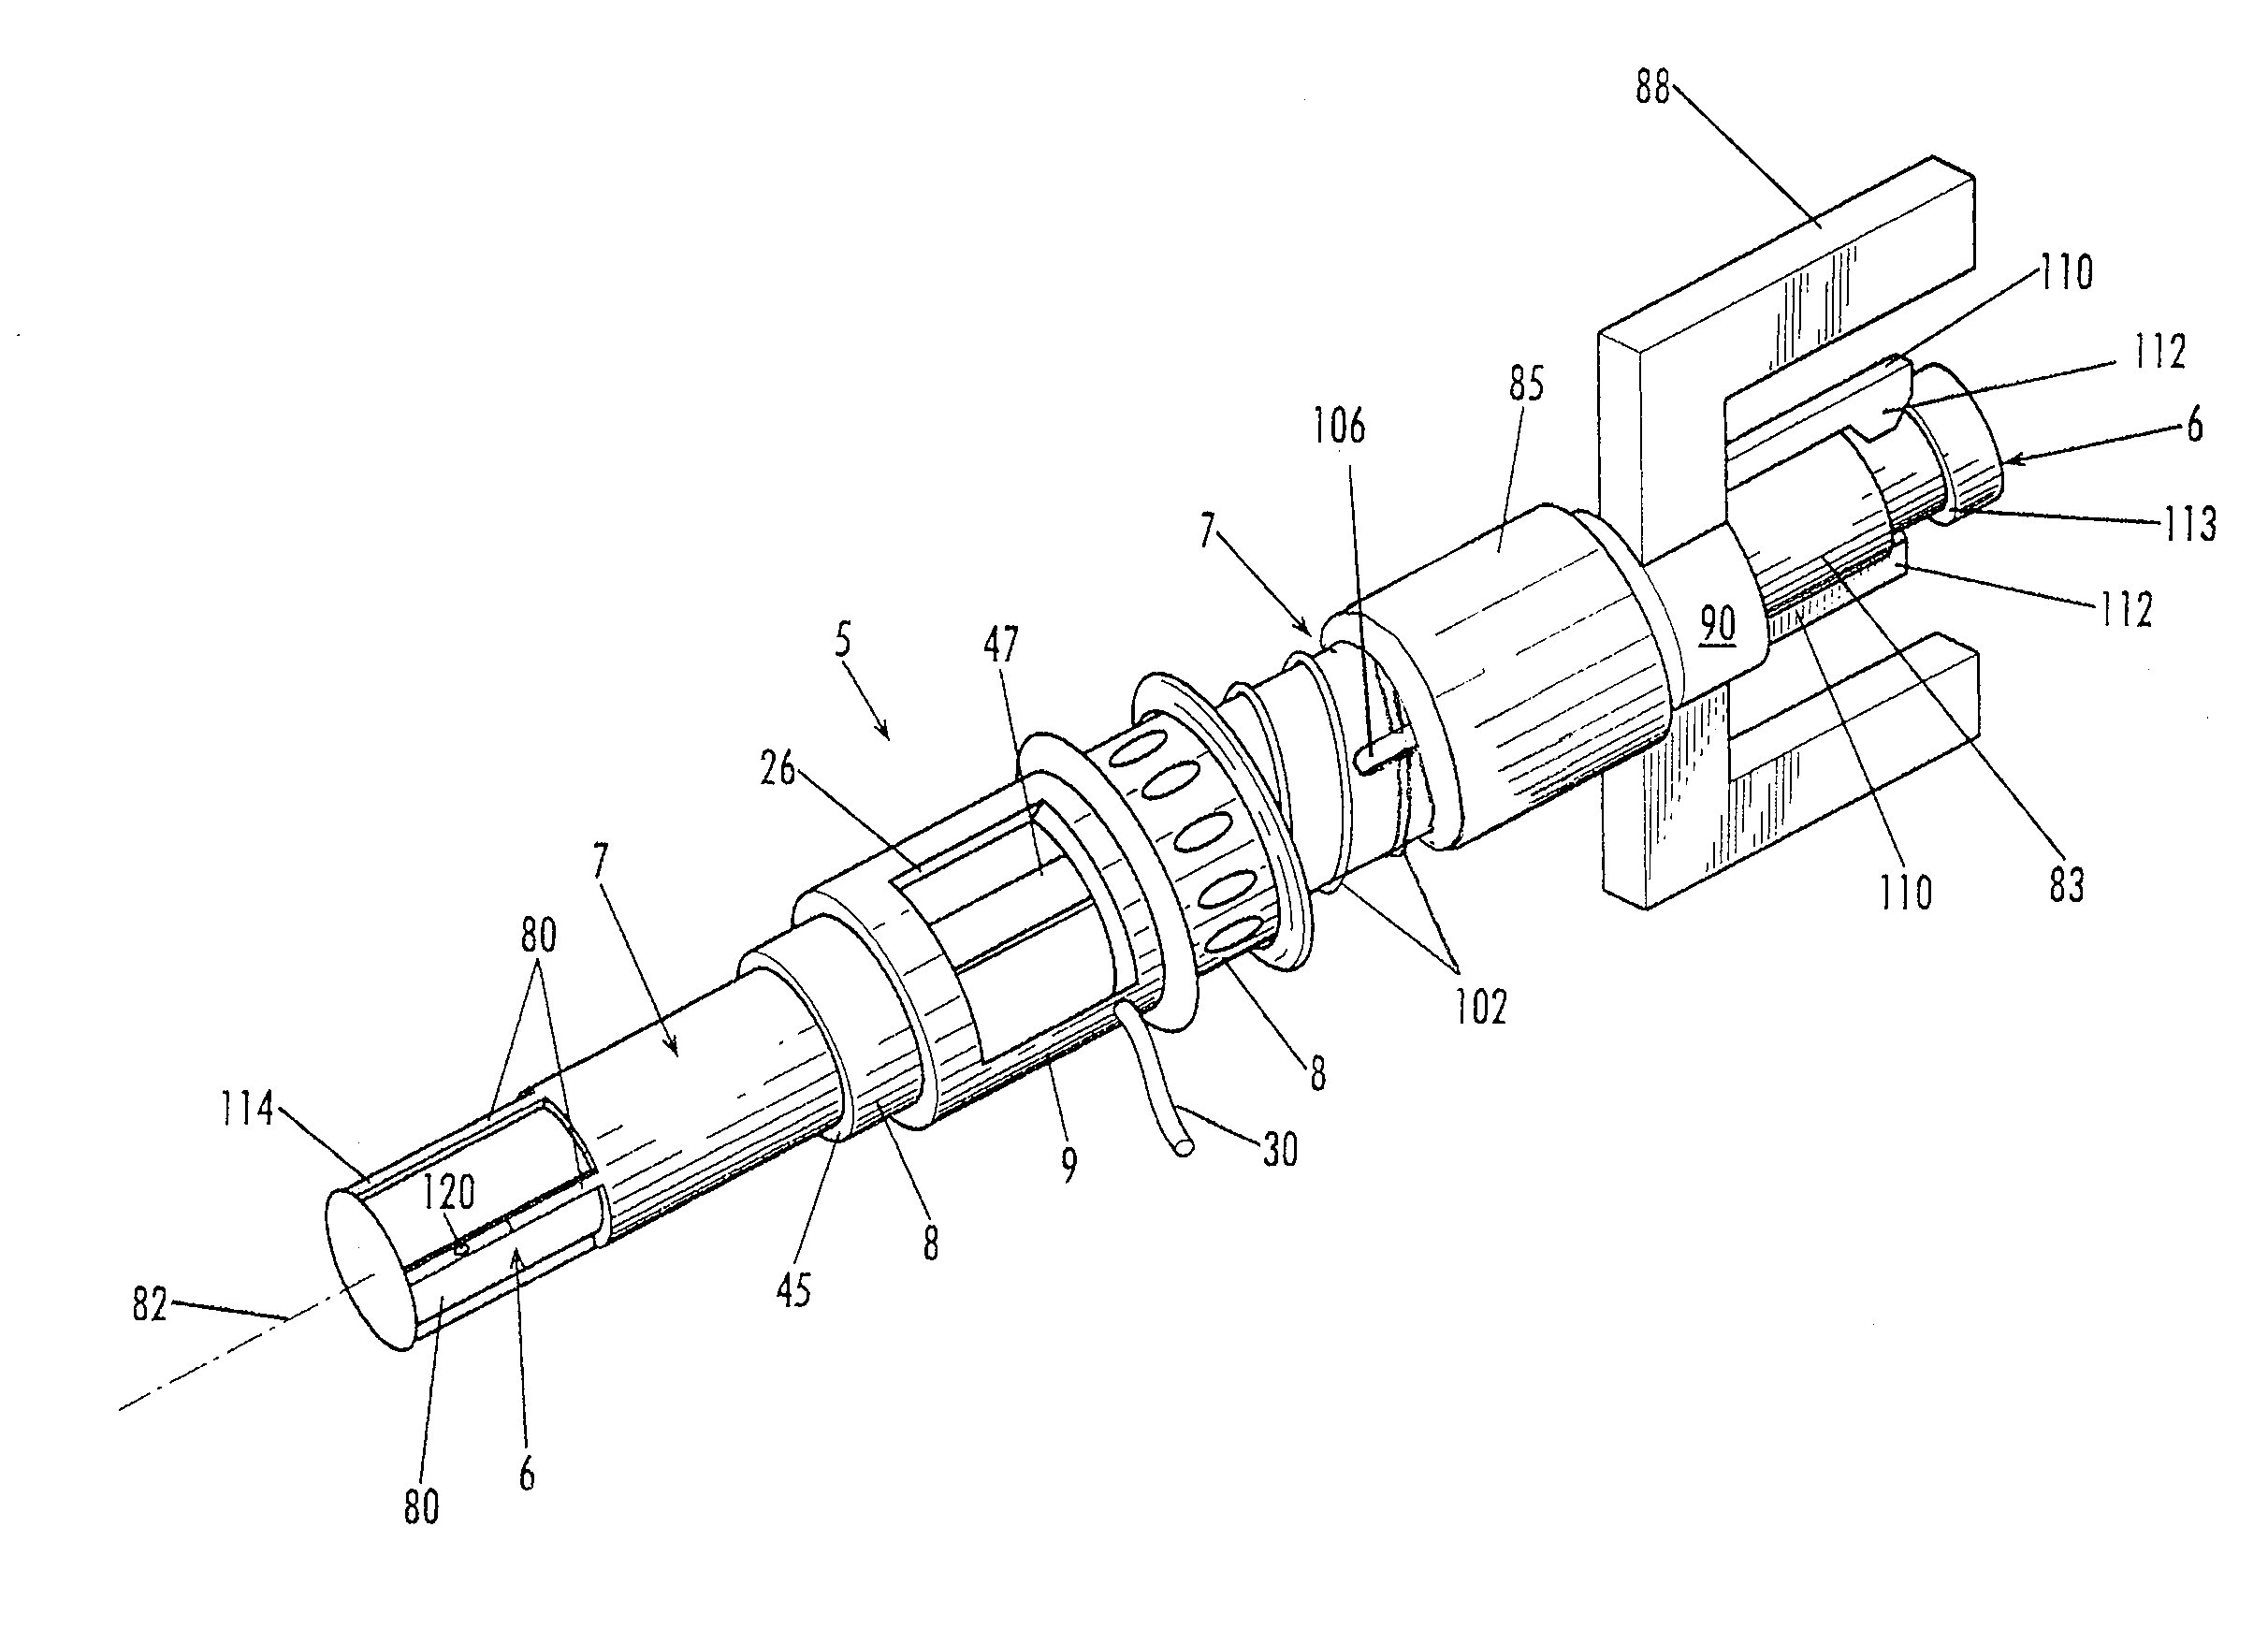 Surgical Instrument for Detecting, Isolating and Excising Tumors